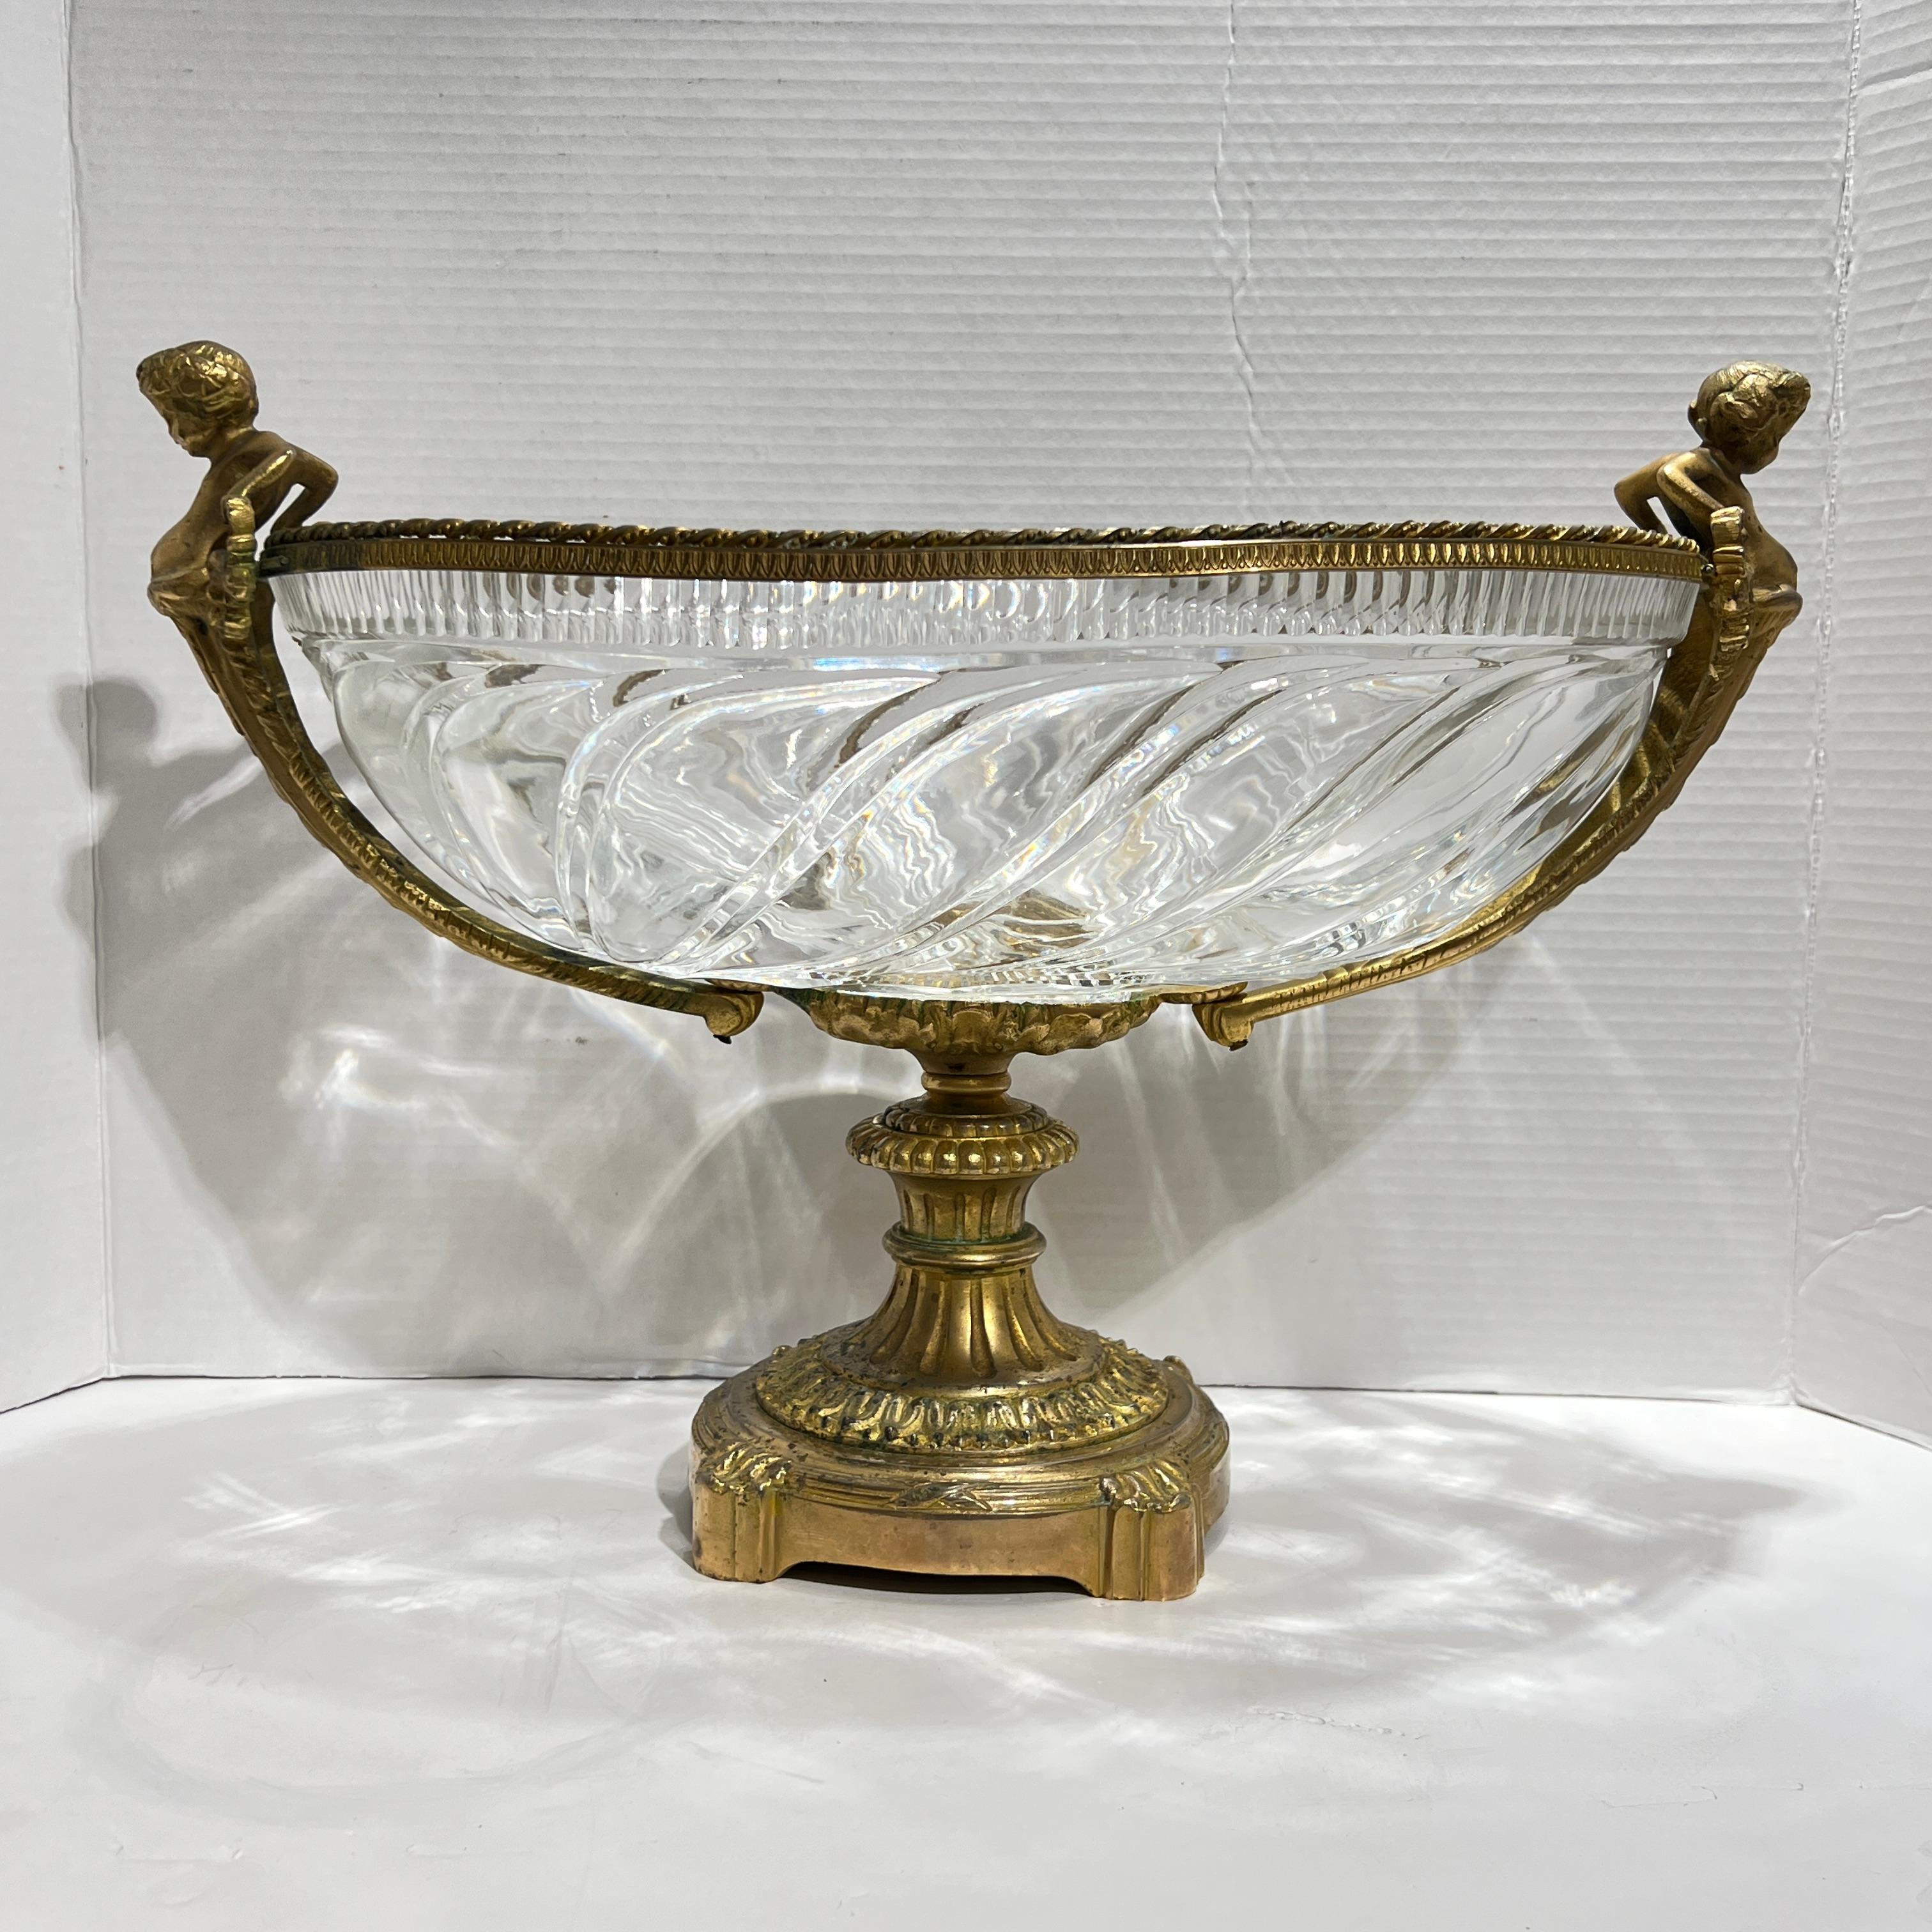 Baccarat style Gilt Bronze Mounted Crystal Glass Centerpiece Bowl 12